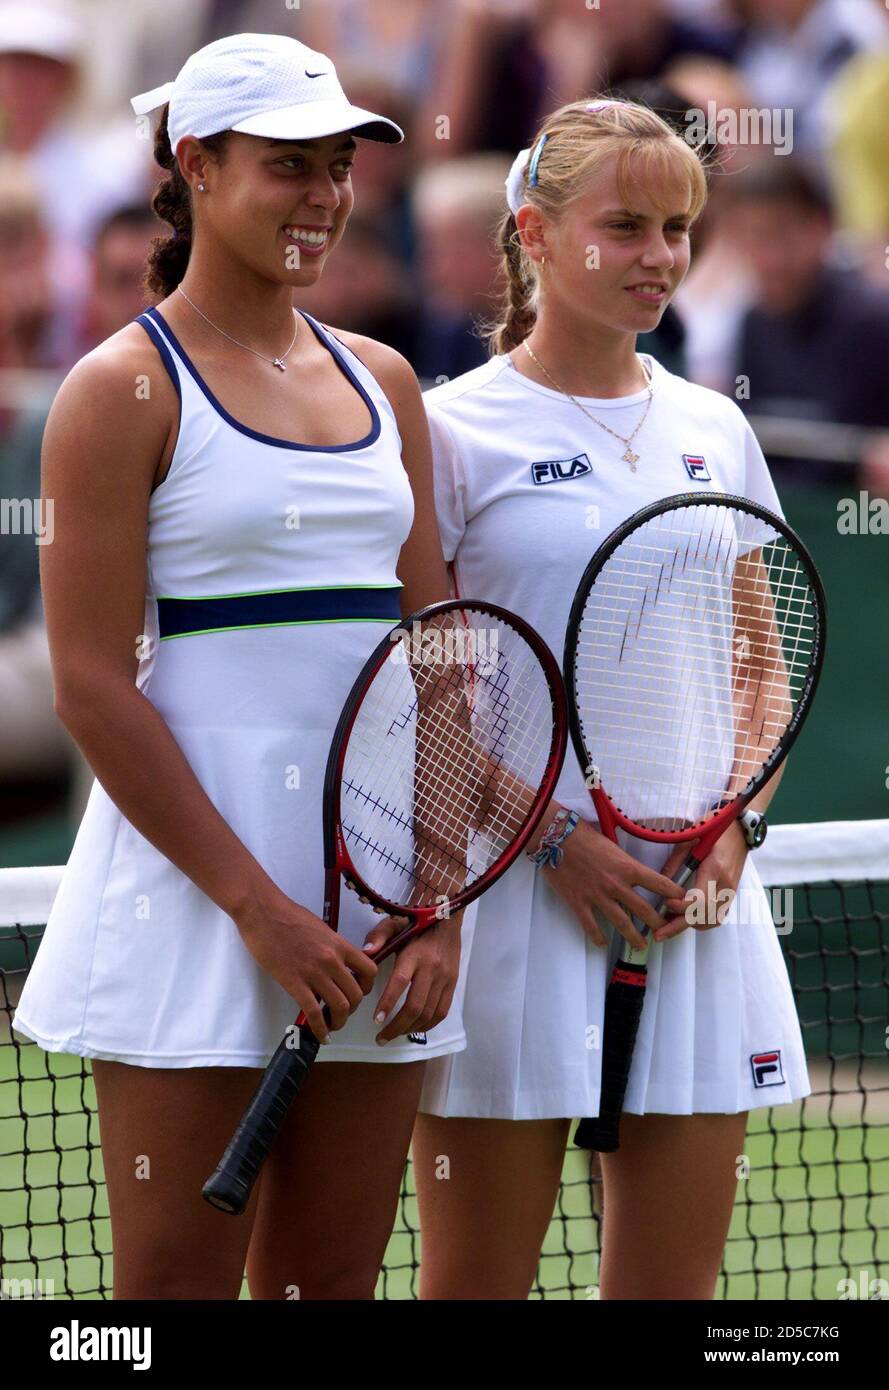 Australia's Jelena Dokic (R) stands with Alexandra Stevenson of the U.S.  before their quarter-final match at the Wimbledon Tennis Championships July  1. Both the women are qualifiers in the competition. DM JB/ME